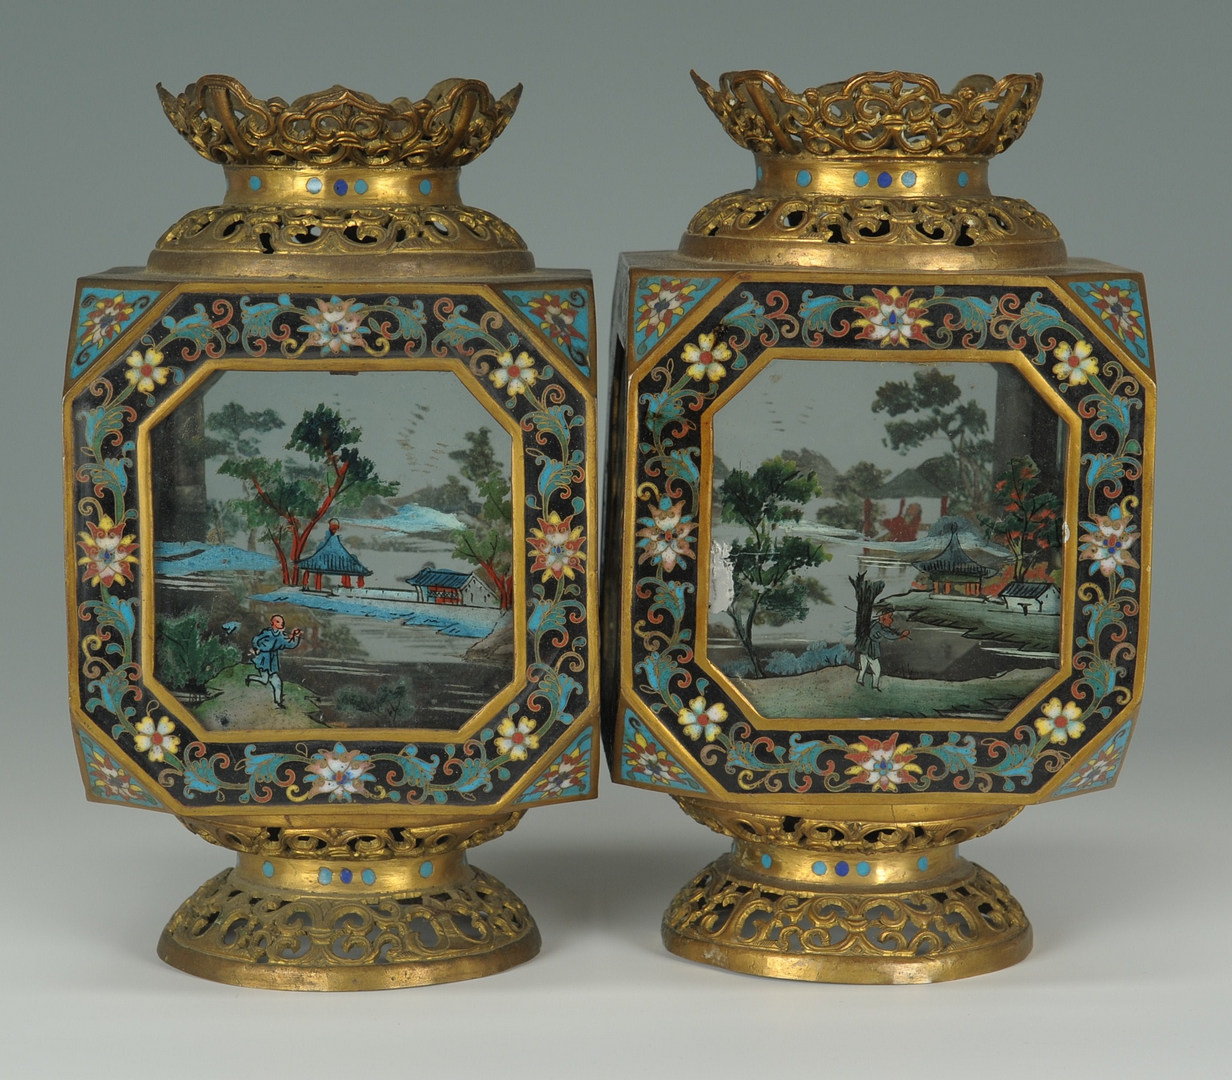 Lot 18: Pair Chinese Cloisonne Painted Table Lanterns